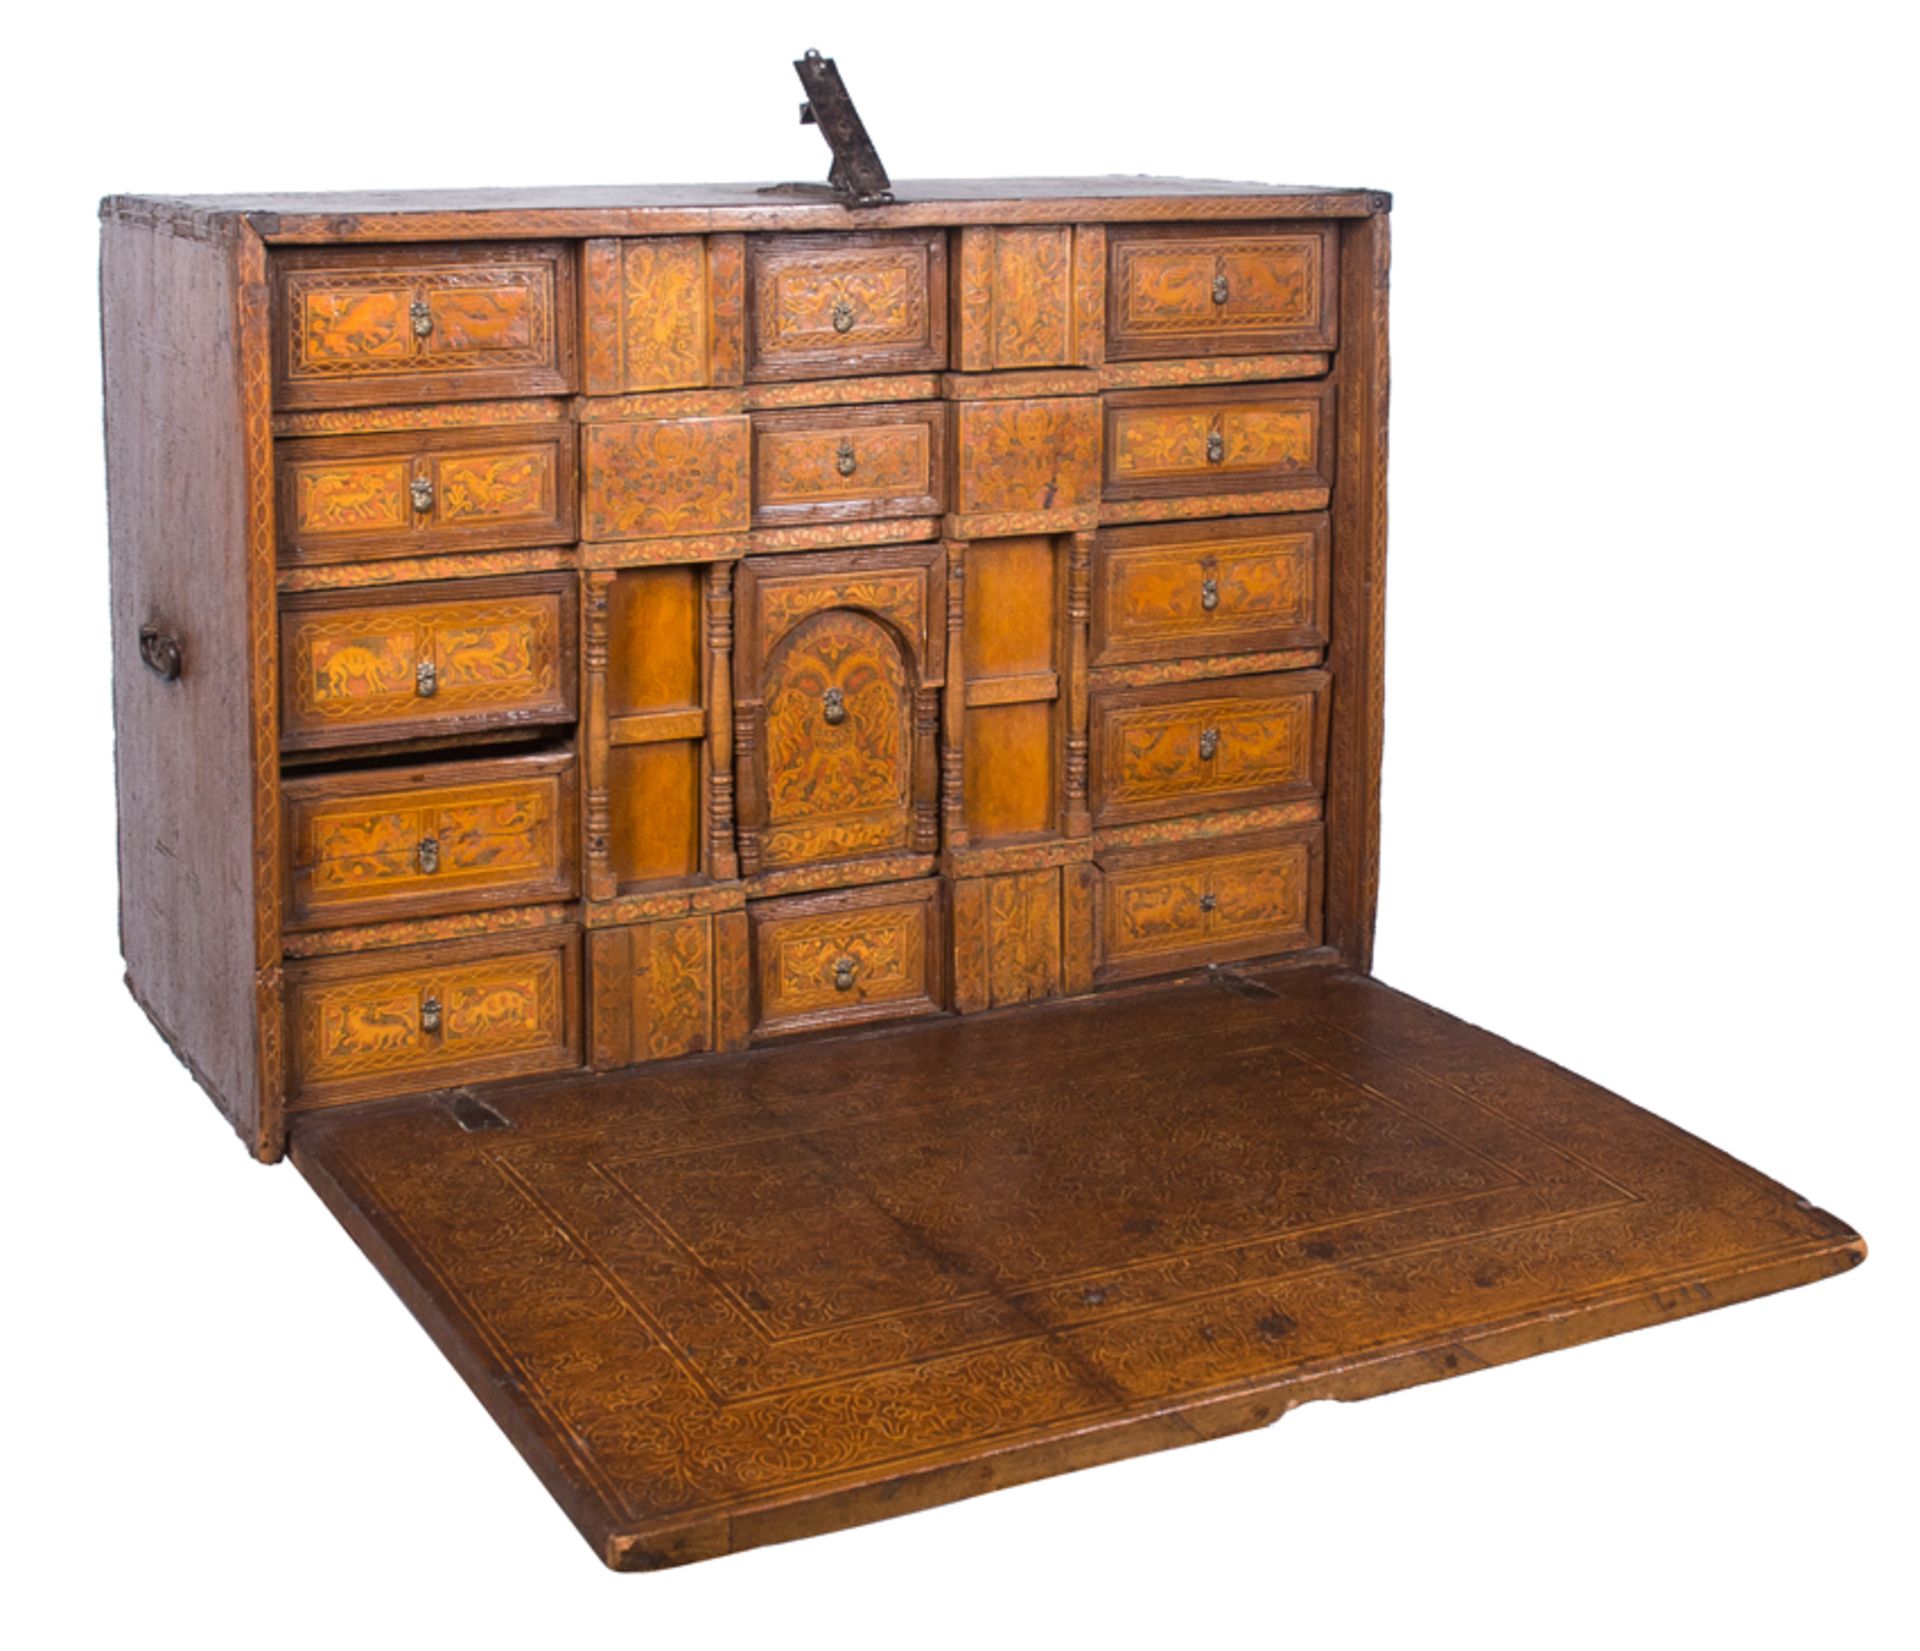 Cedar and fruit wood desk with incised, tinted decoration, inlay and iron fittings. Colonial work. V